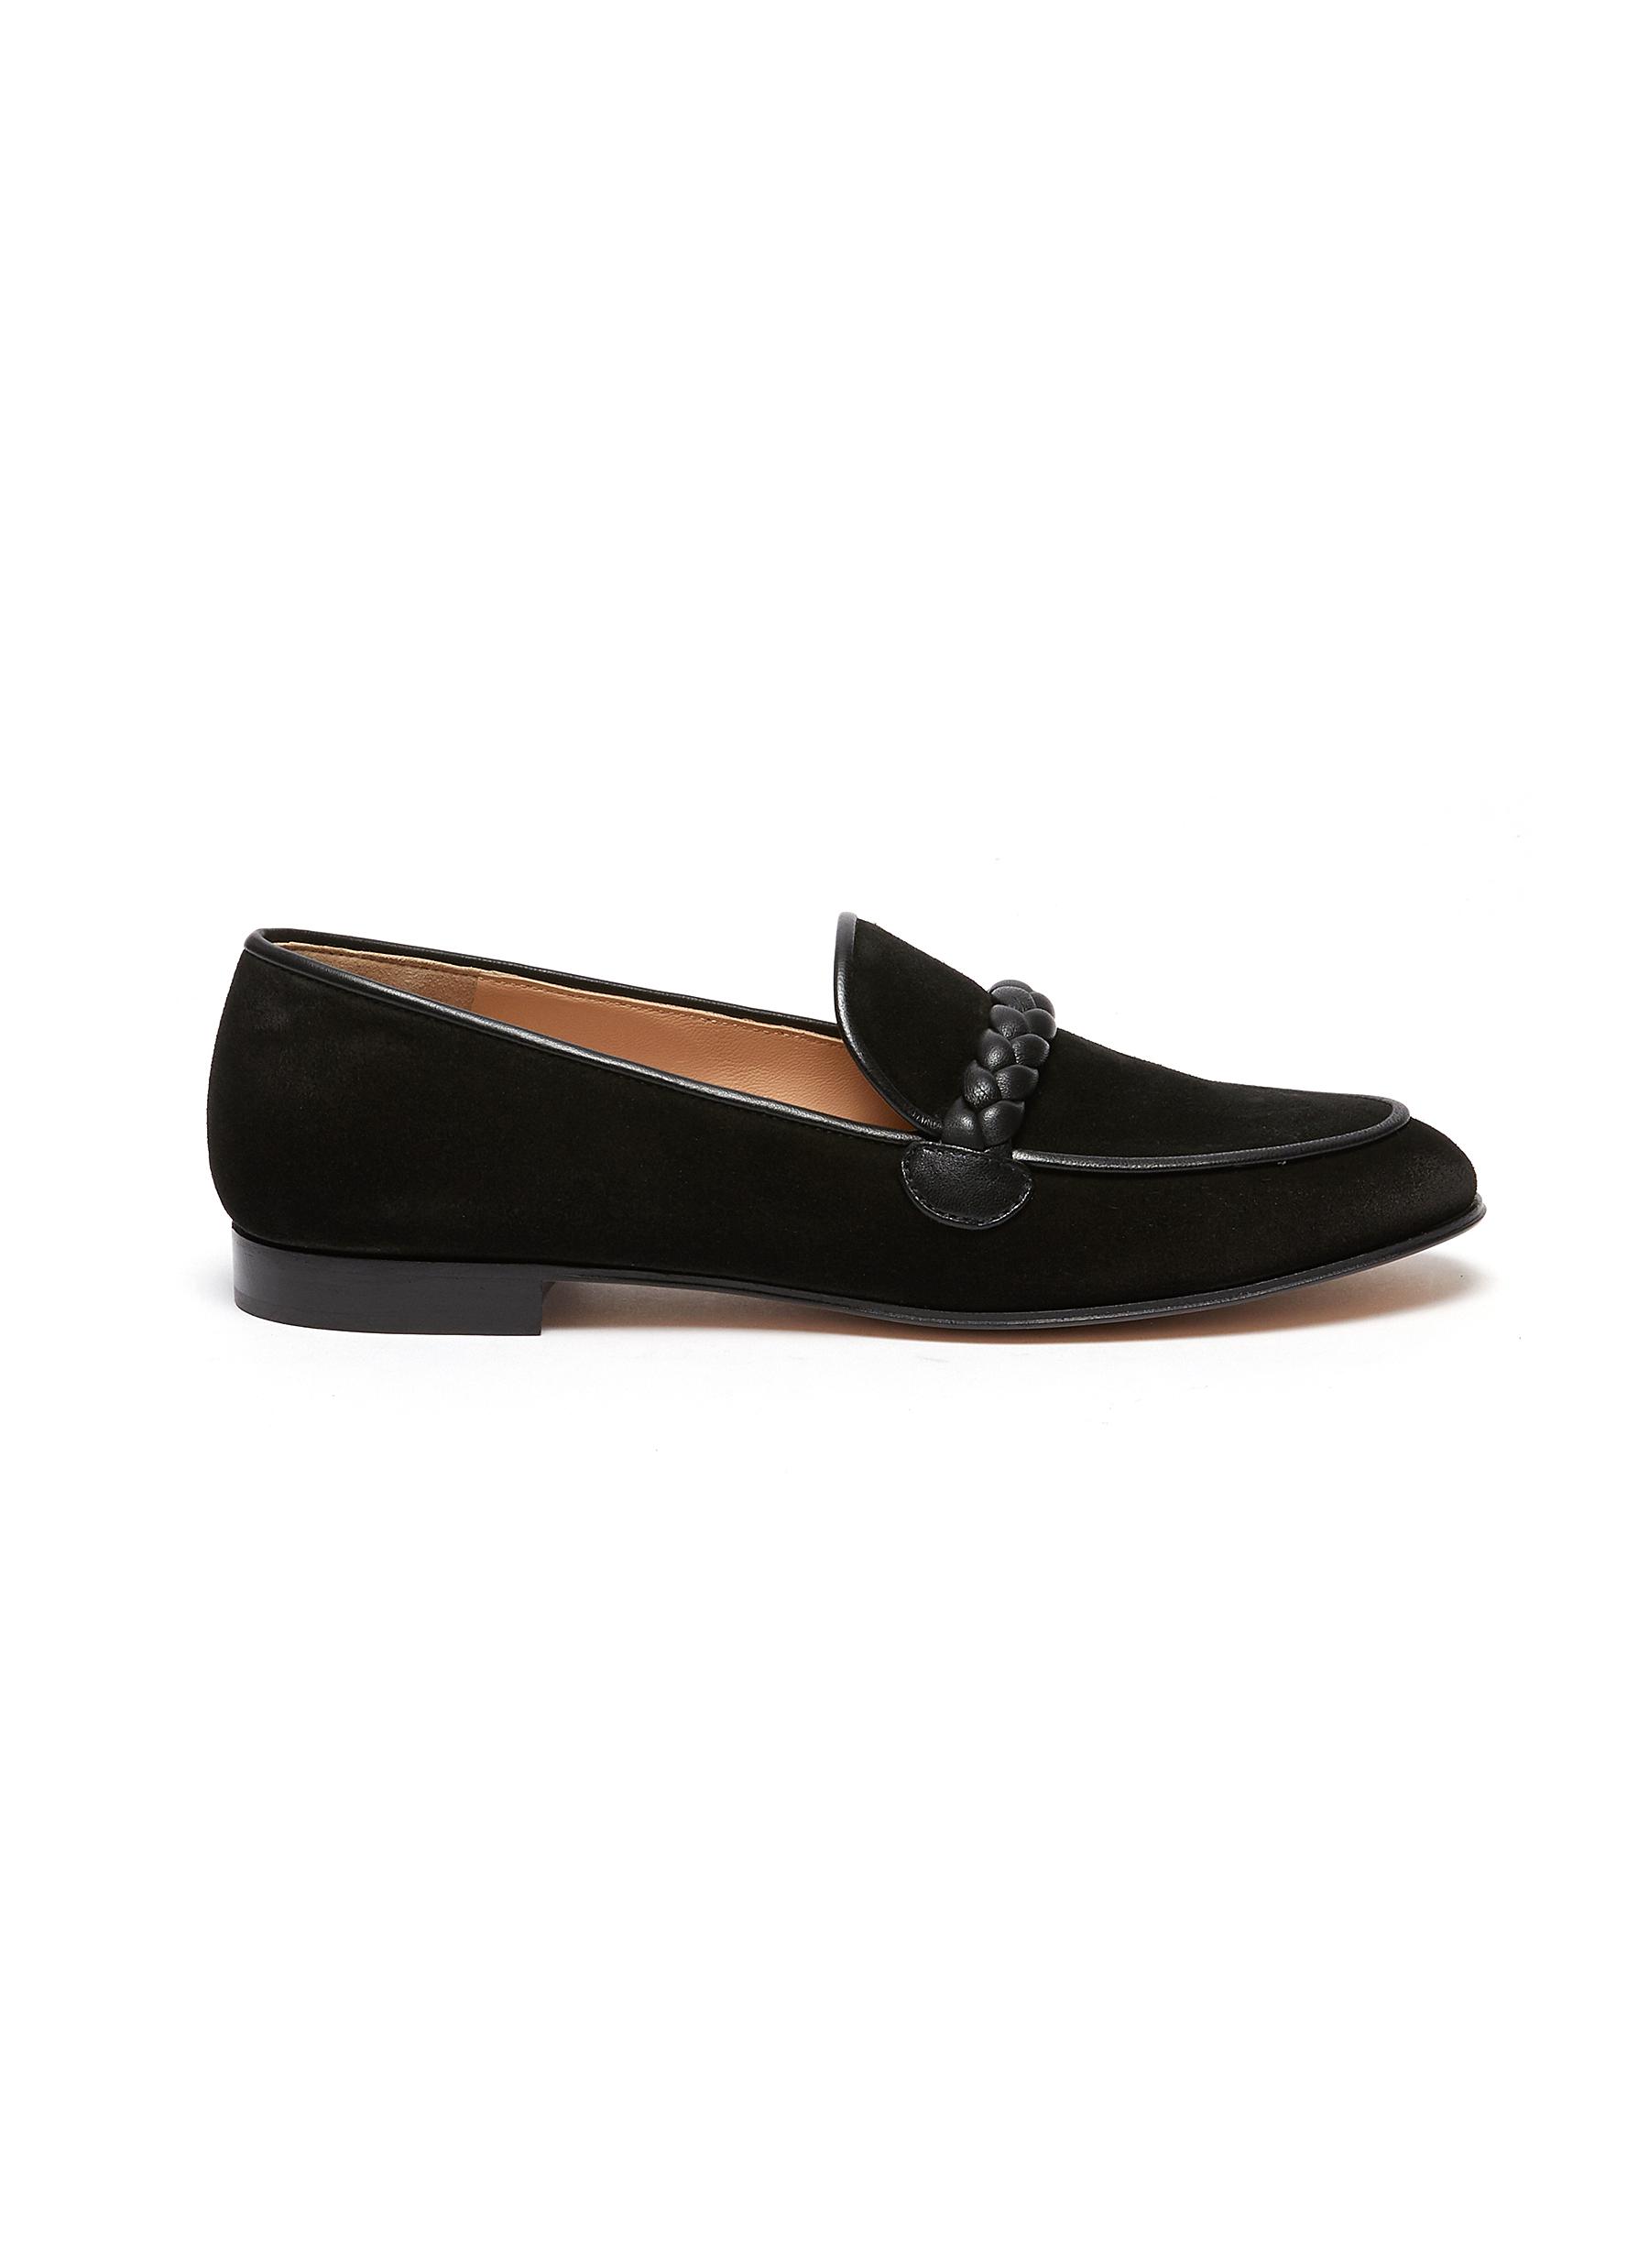 GIANVITO ROSSI LEATHER BRAID DETAIL SUEDE LOAFERS